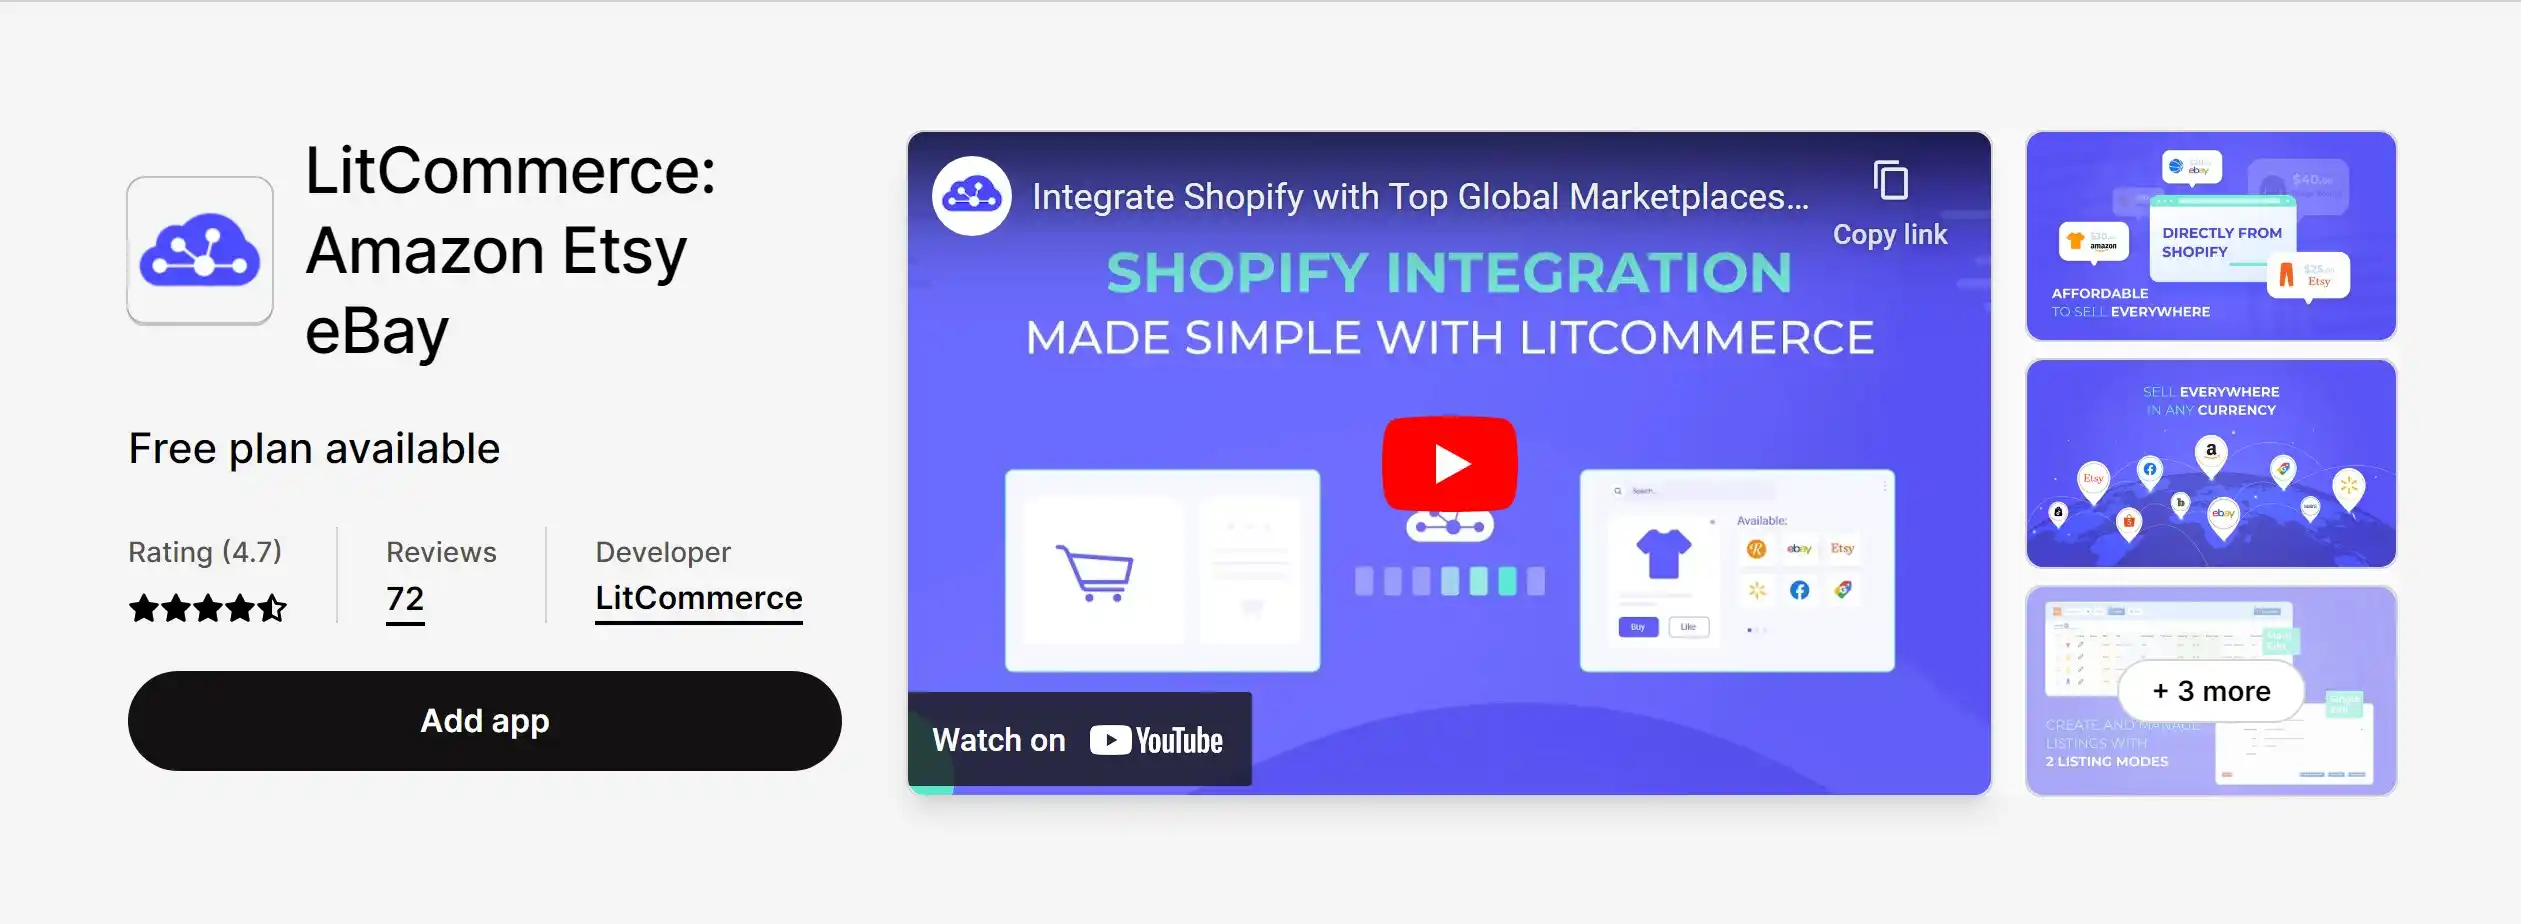 Shopify integration with marketplace